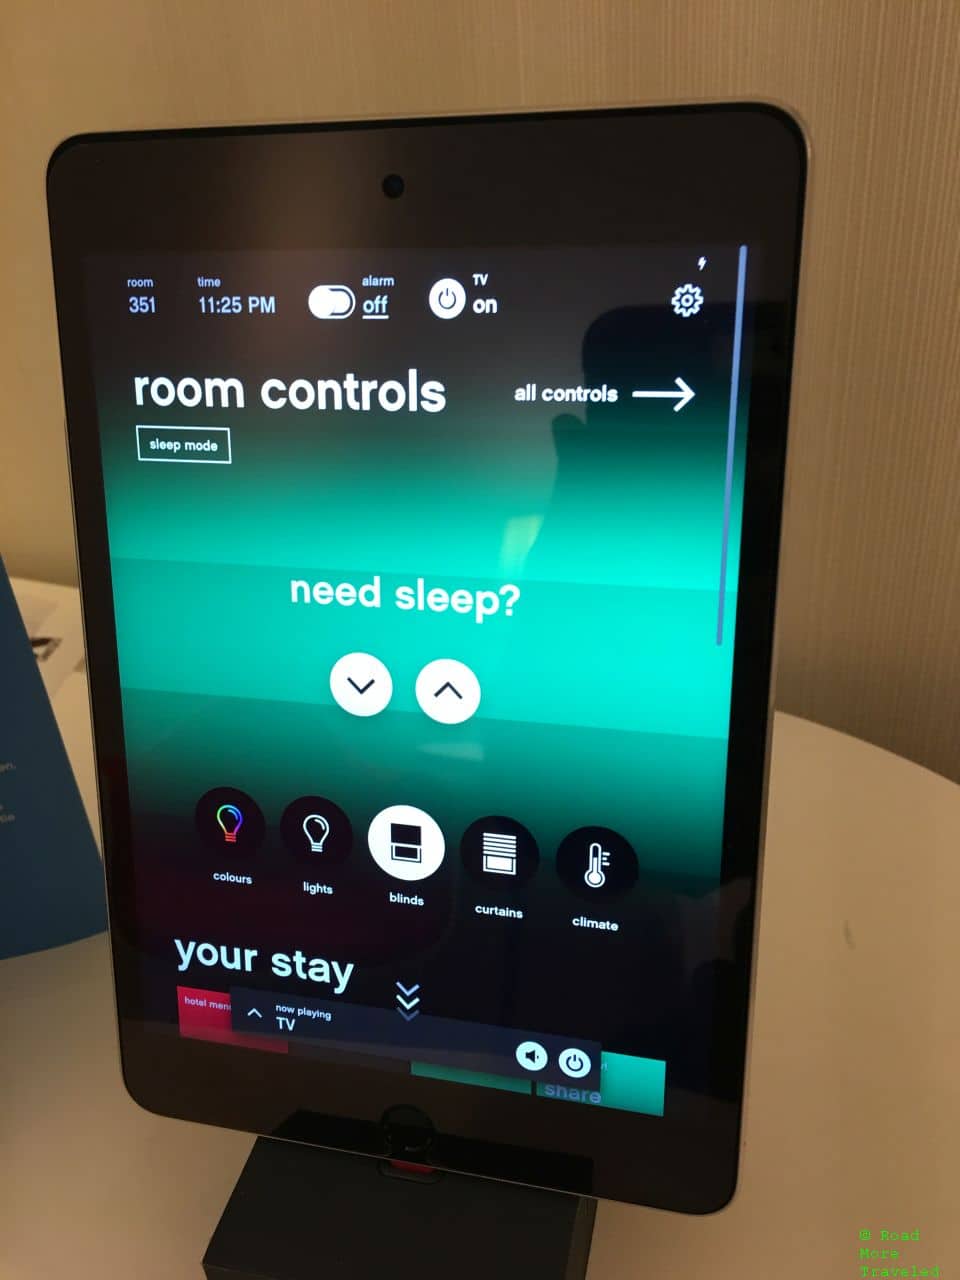 citizenM CDG window blind controls